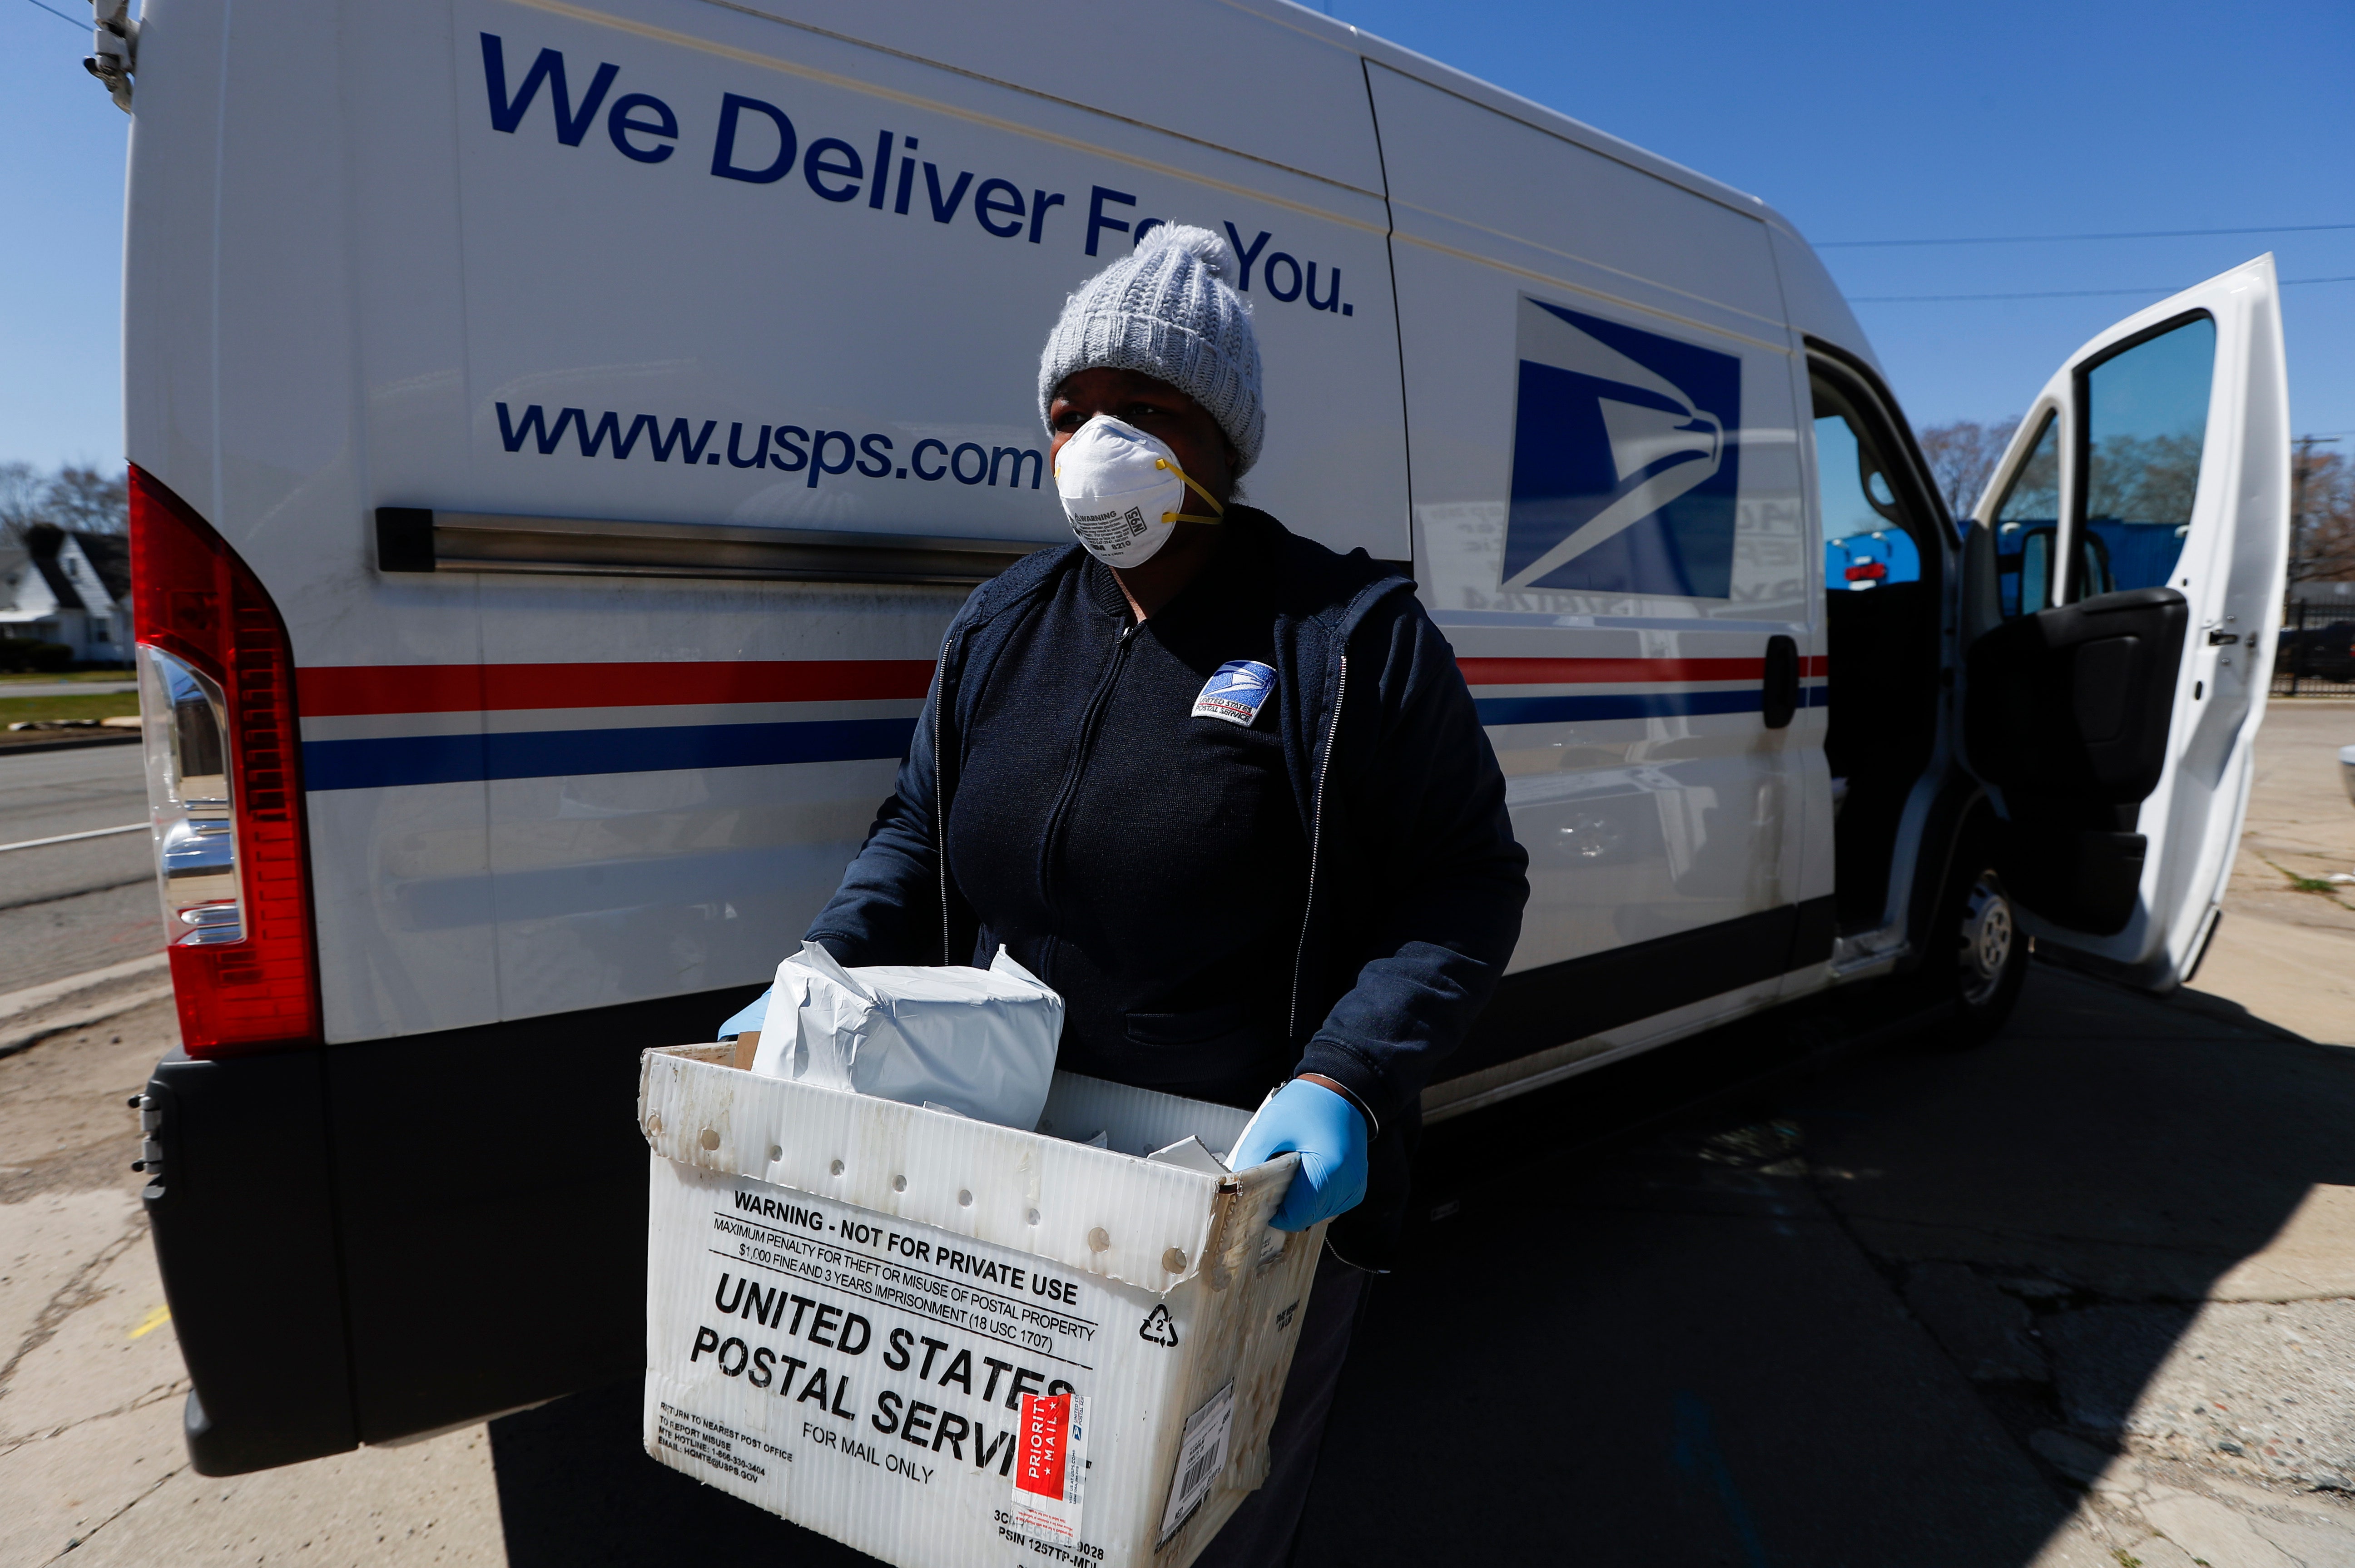 Post offices to consolidate postal districts, offer early retirement to non-union workers